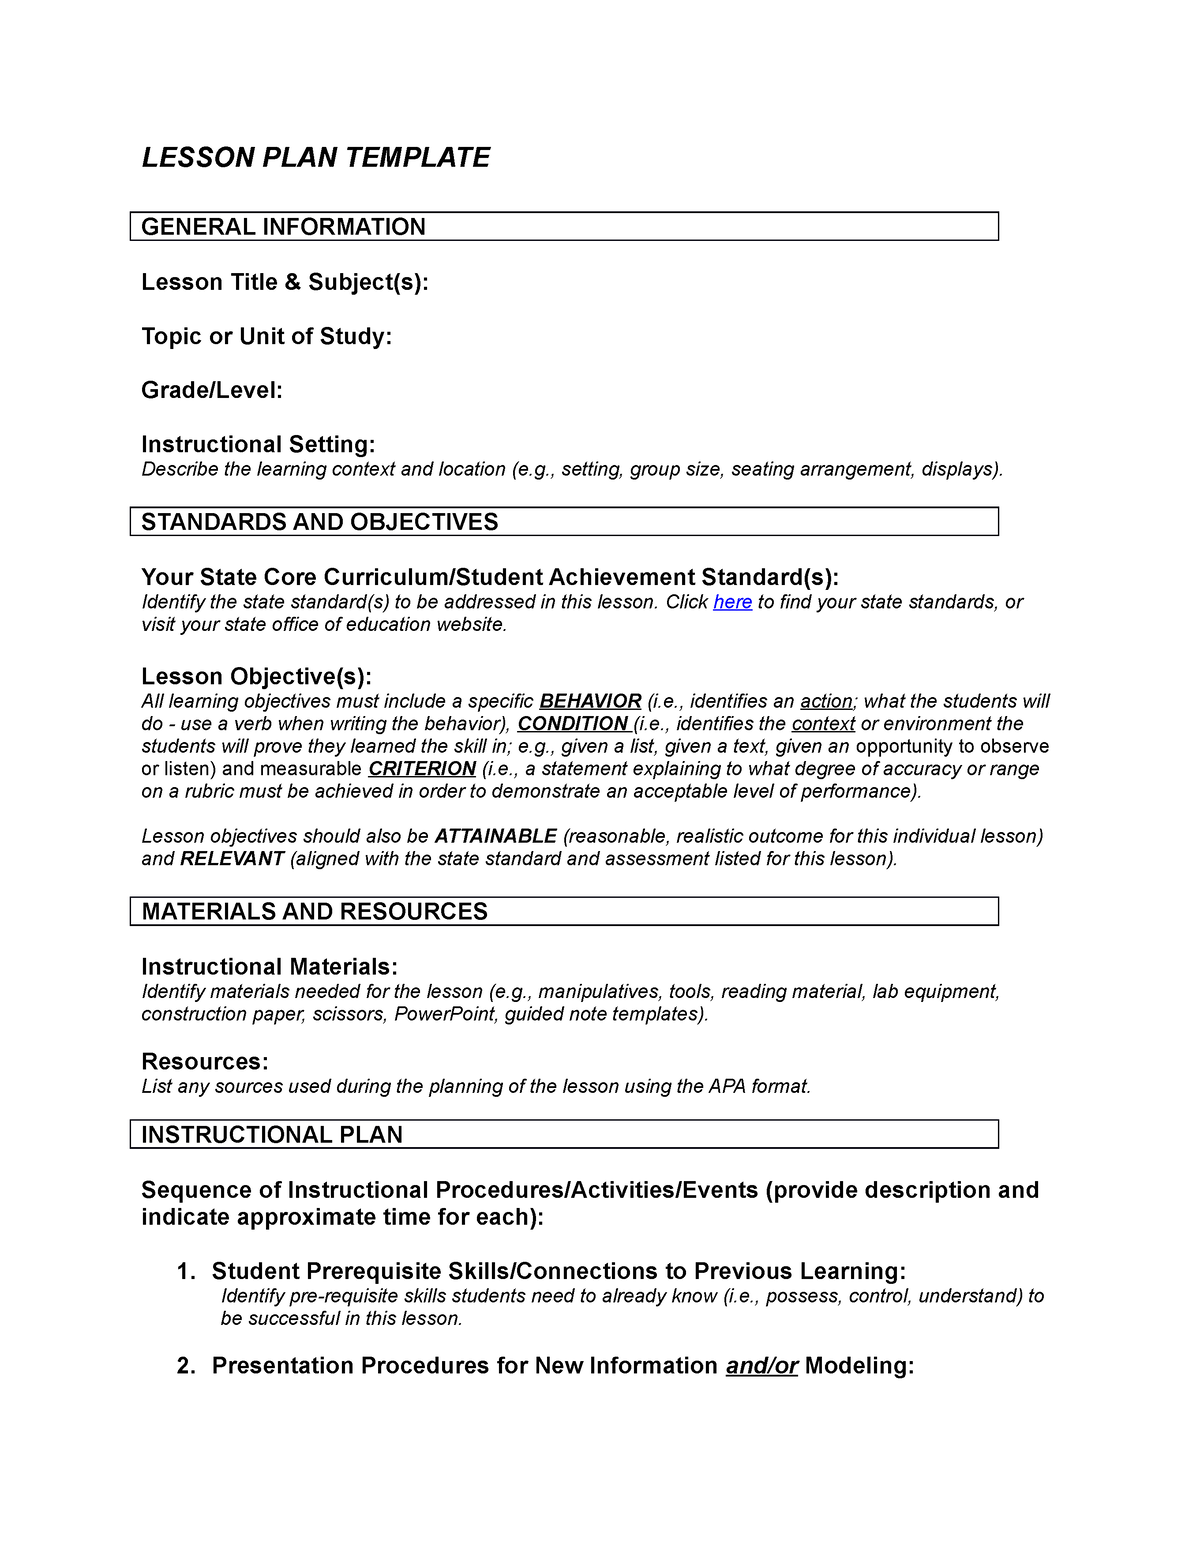 WGU Lesson Plan Template LESSON PLAN TEMPLATE GENERAL INFORMATION